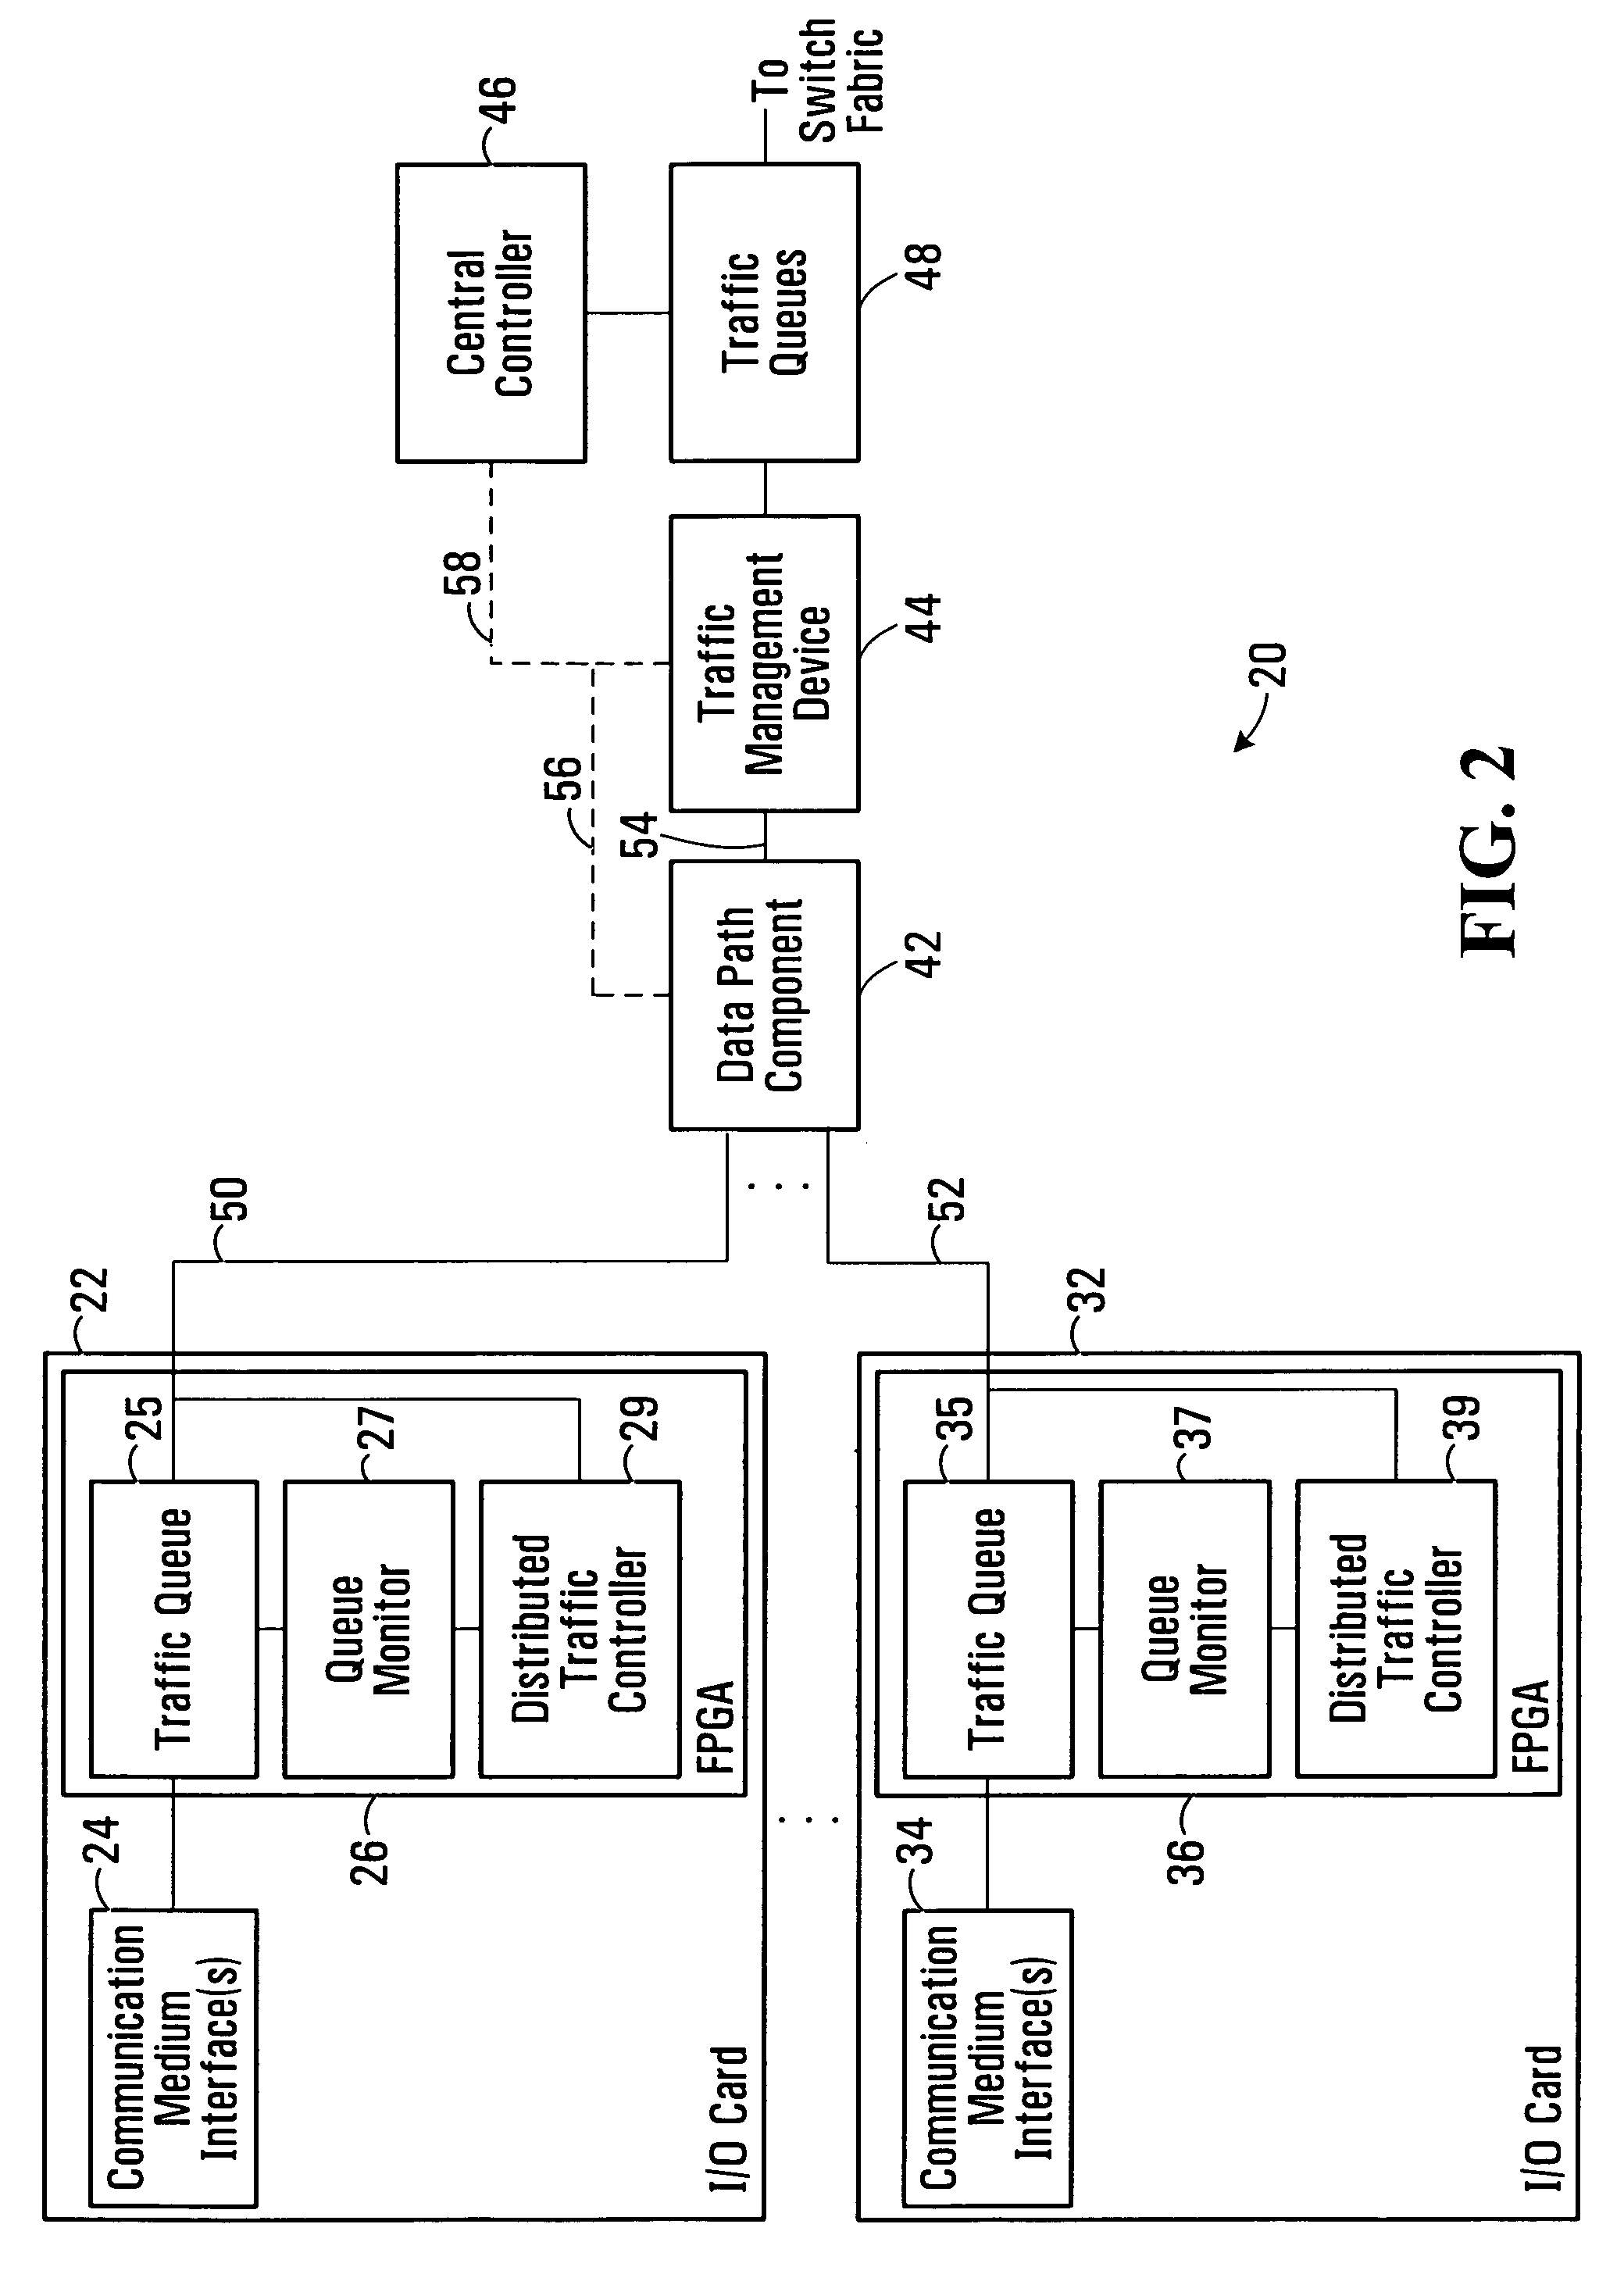 Distributed communication traffic control systems and methods